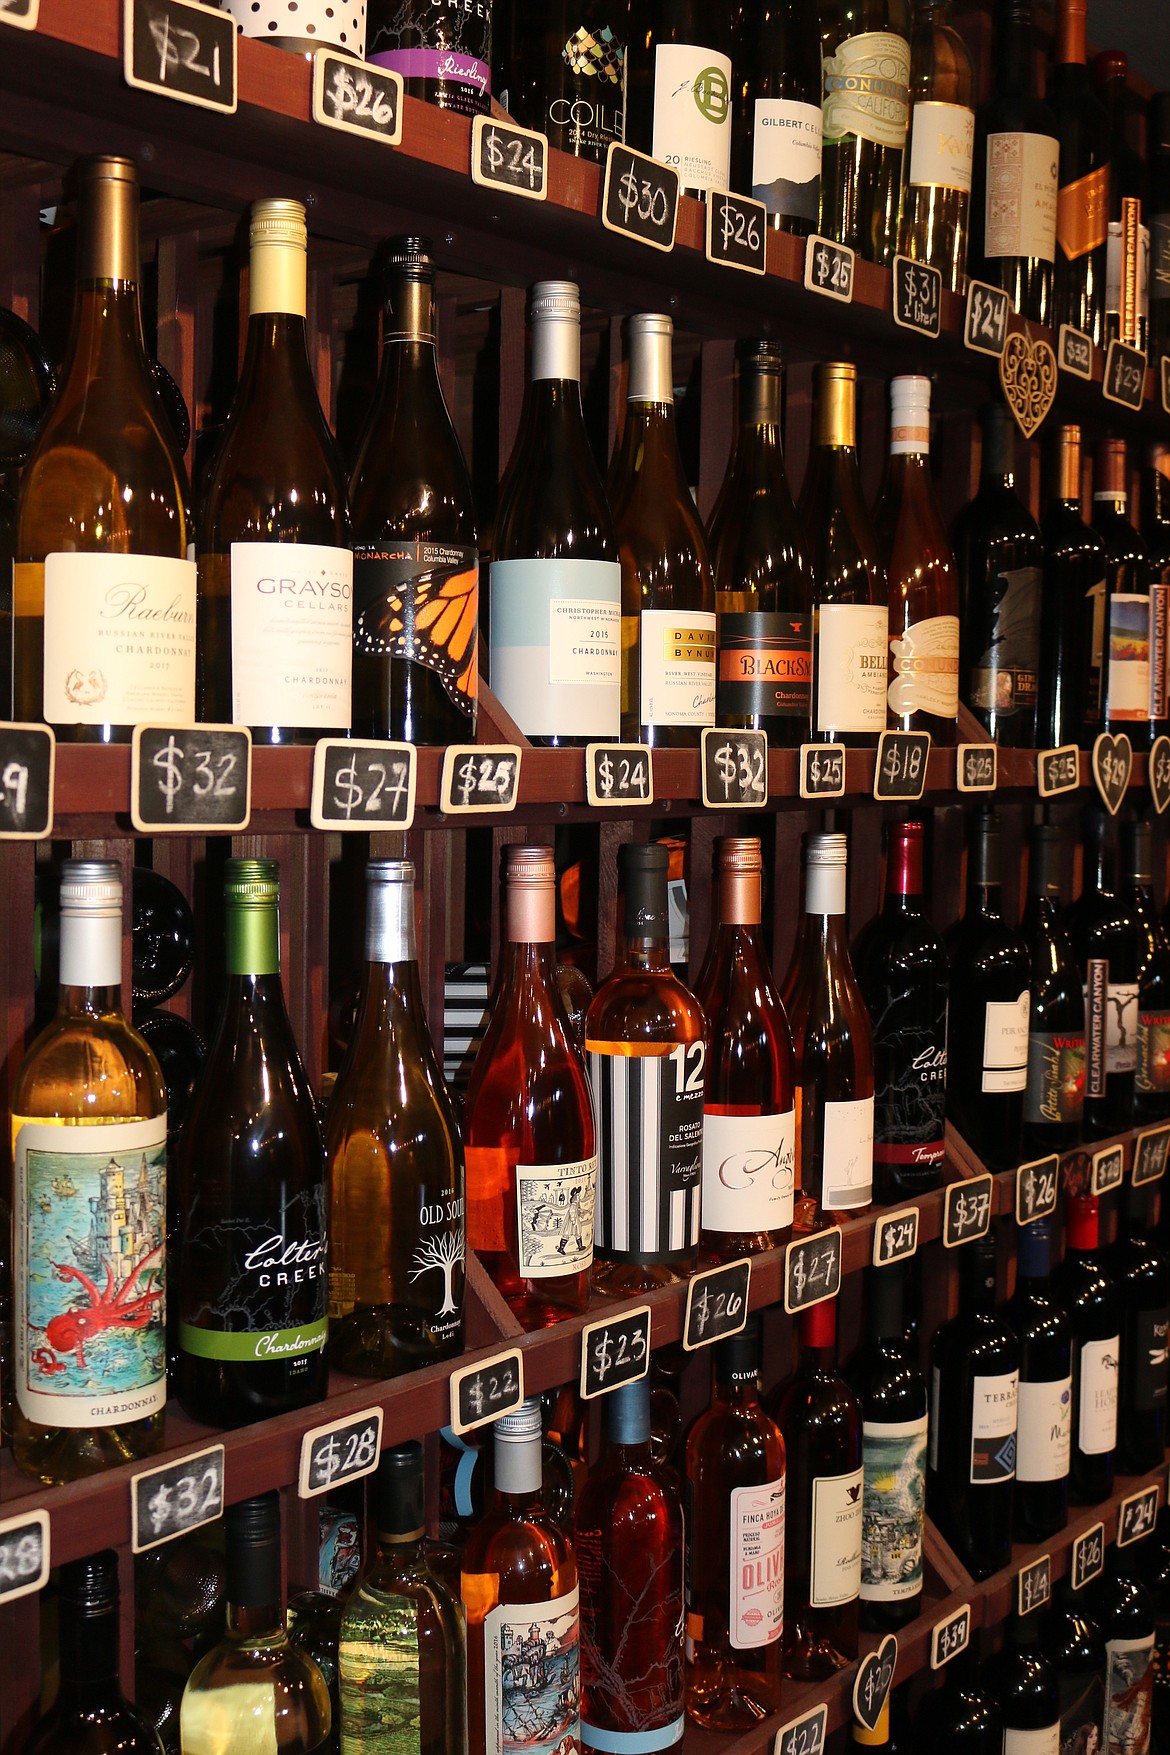 Photo by MANDI BATEMAN
A wide selection of wines line the walls of Heart Rock Wines, winner of the 2019 Best of Boundary County Best Wine category.